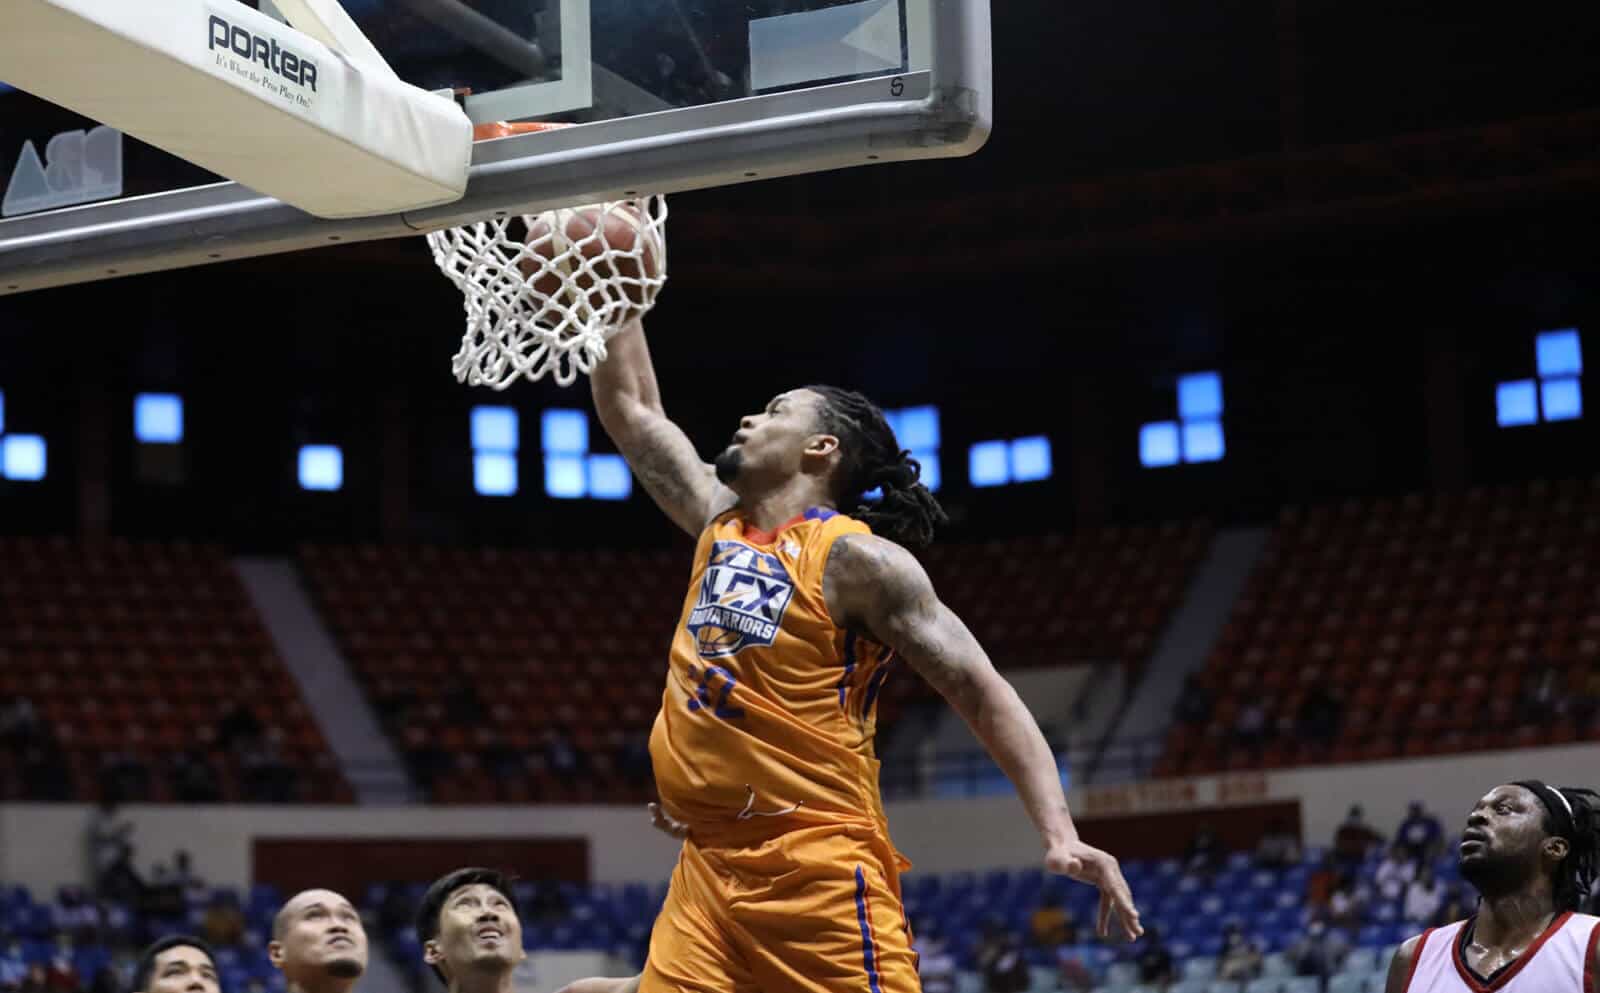 NLEX basketball player stuns Rain or Shine with comeback from 22-points down.